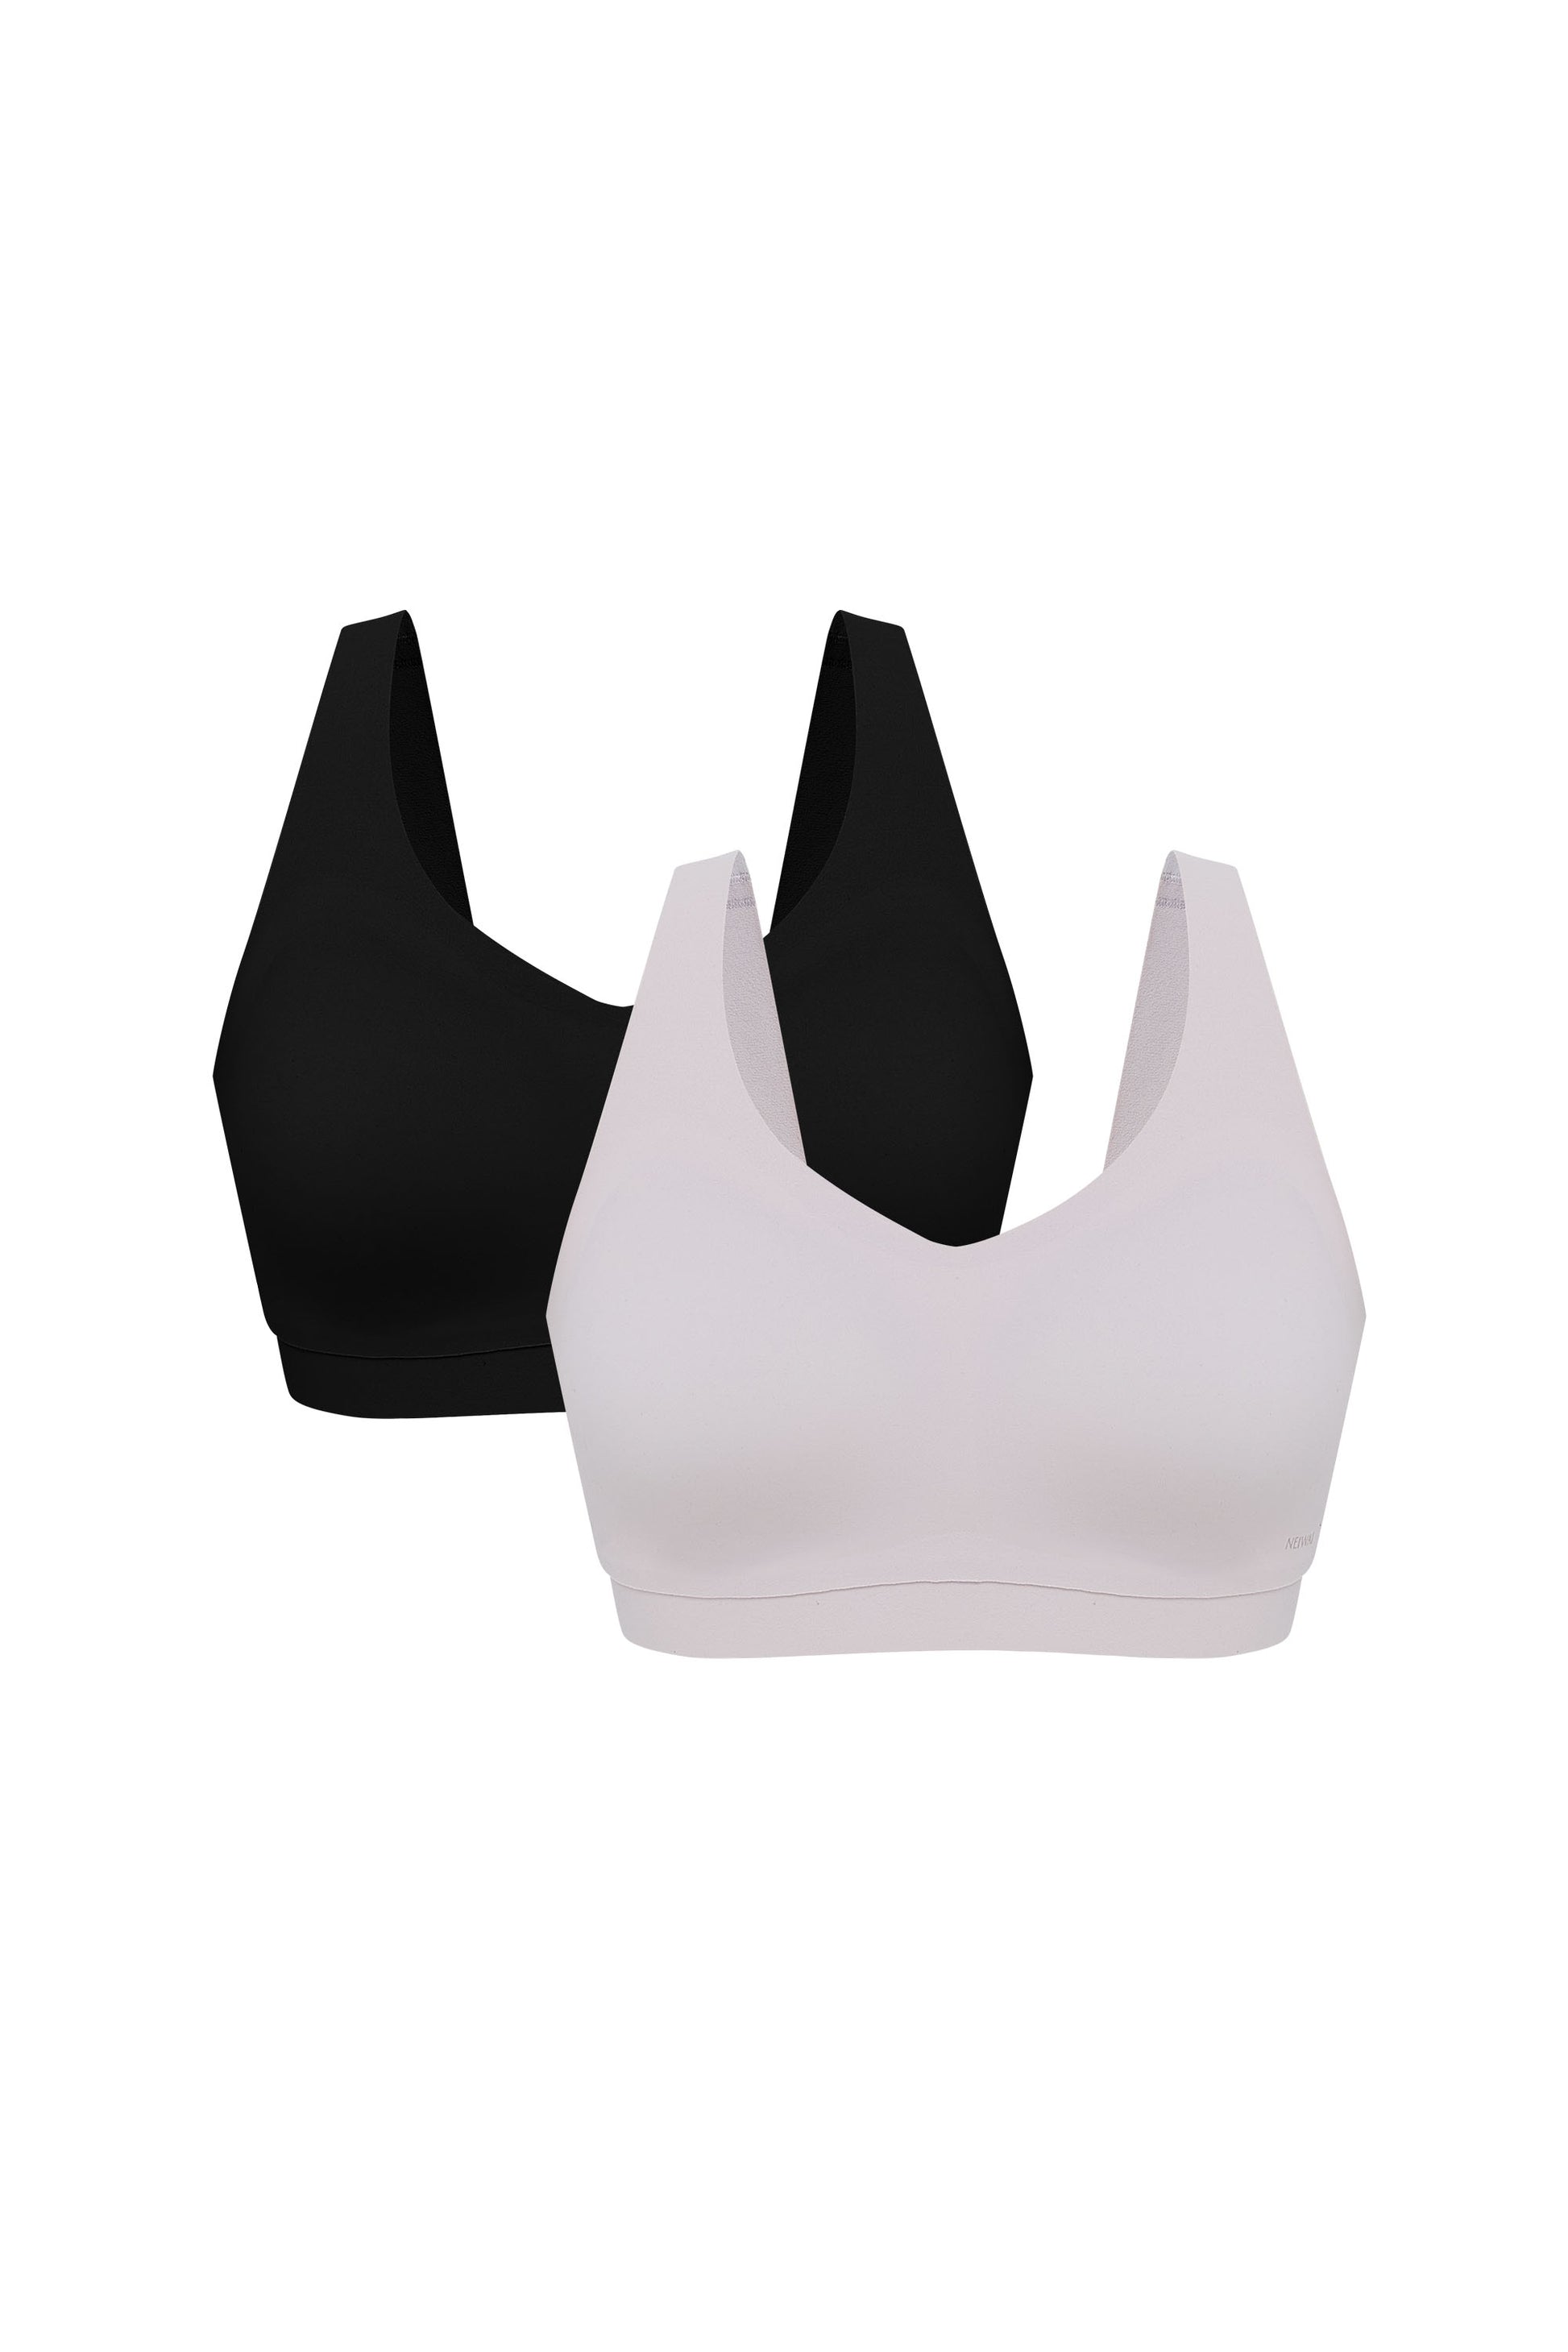 two bras in black and off white